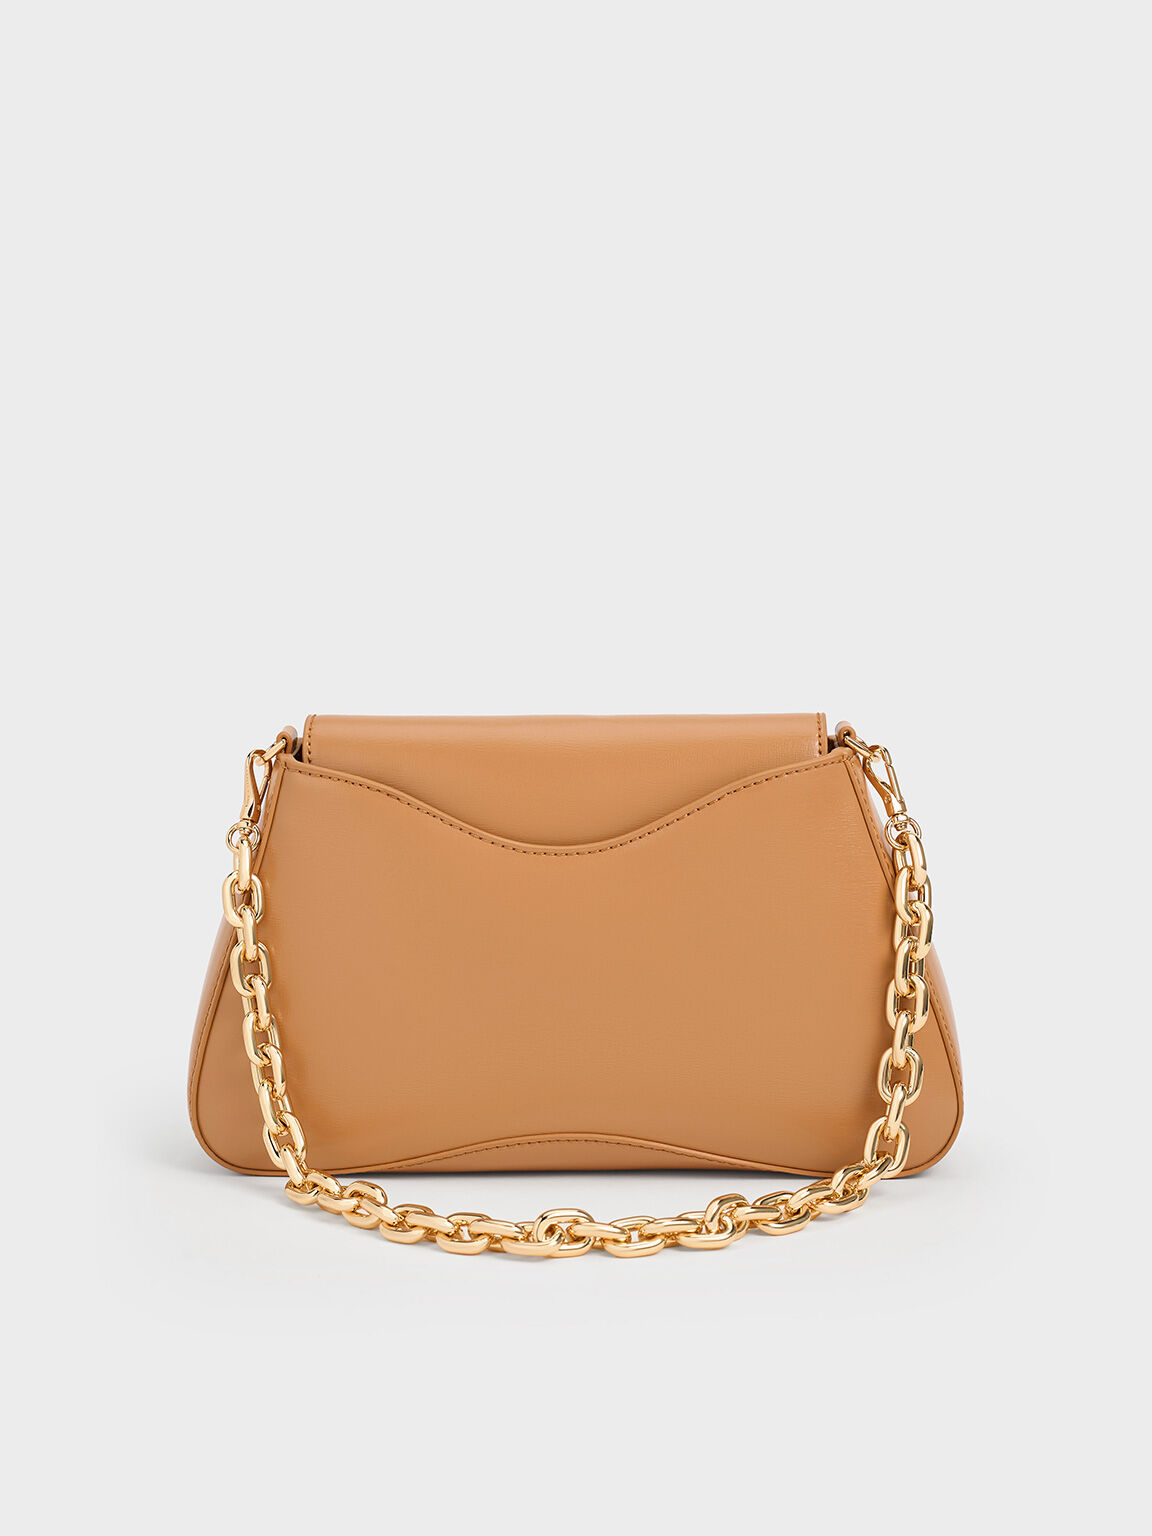 Sybill Trapeze Chain-Handle Bag, Toffee, hi-res